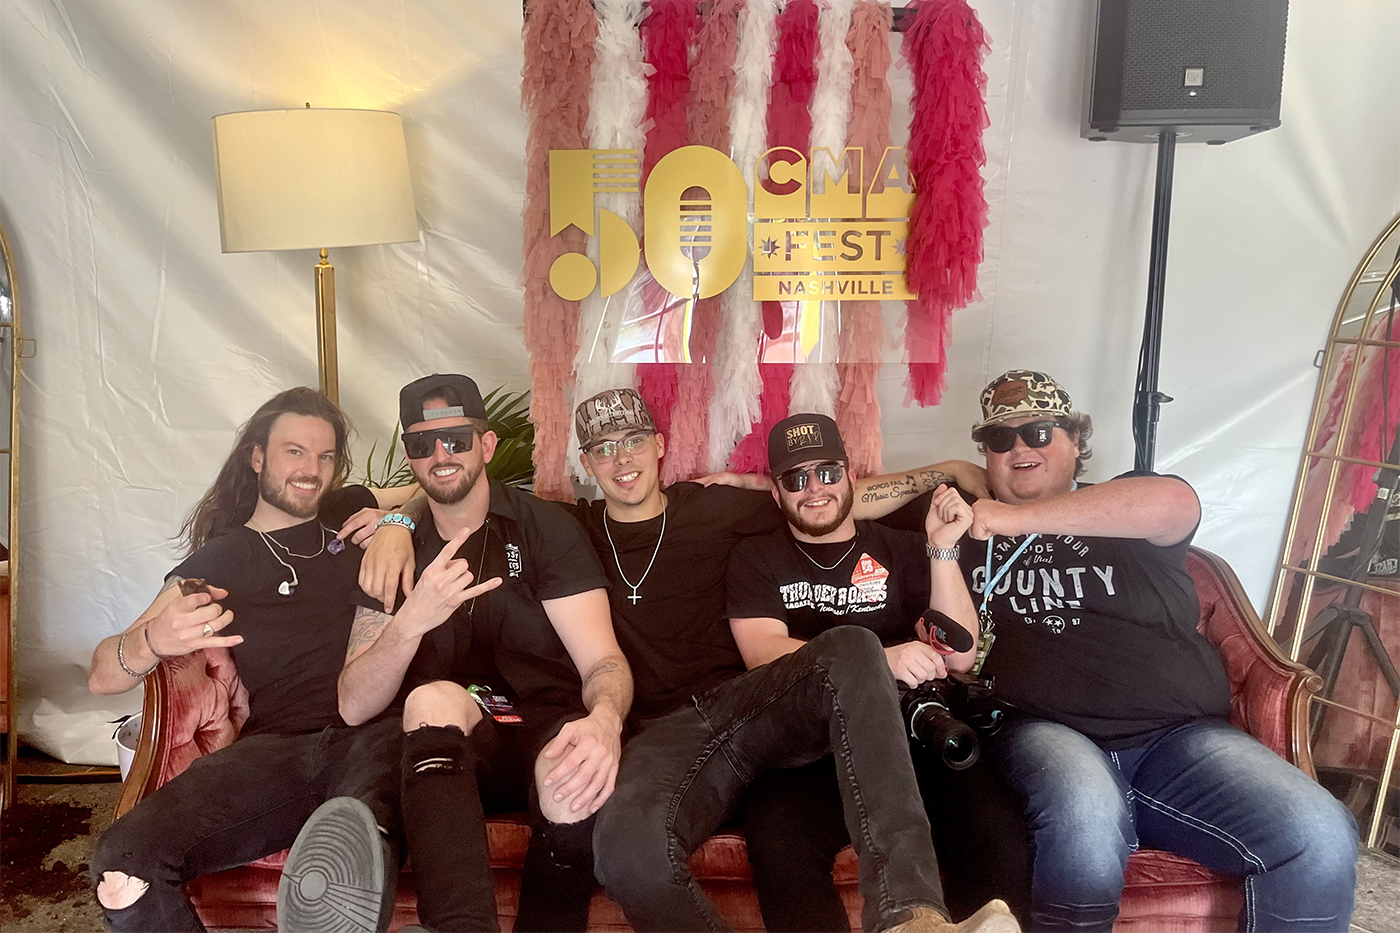 group of people wearing black t-shirts and sunglasses posing on a couch at the 50th CMA Fest in Nashville